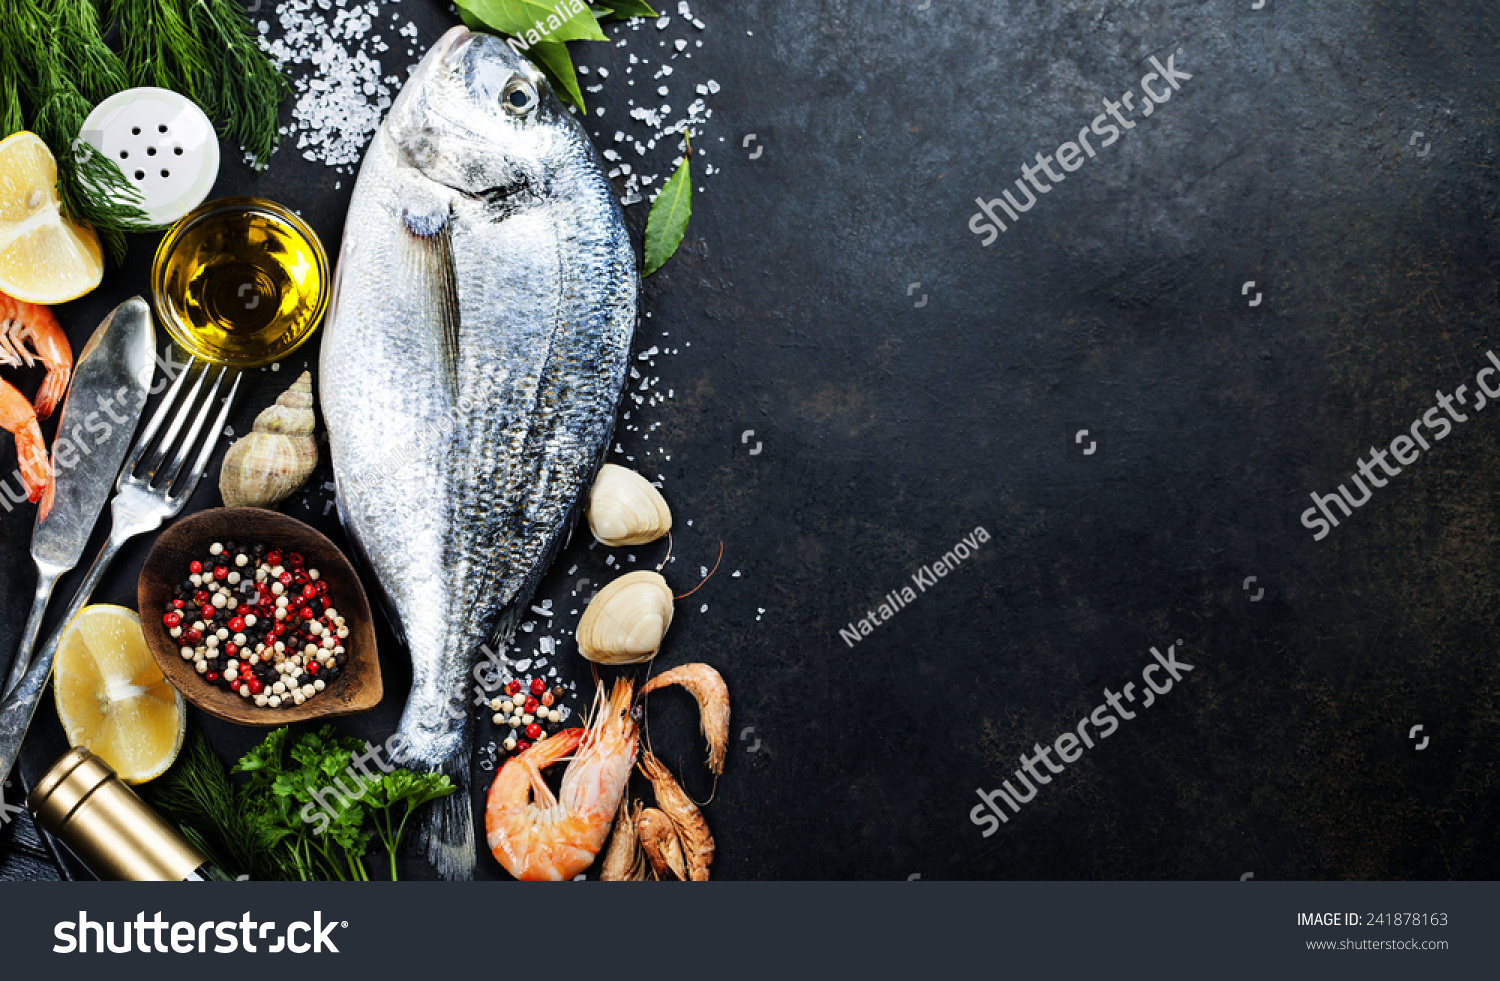 Delicious fresh fish on dark vintage background. Fish with aromatic herbs, spices and vegetables - healthy food, diet or cooking concept  #241878163